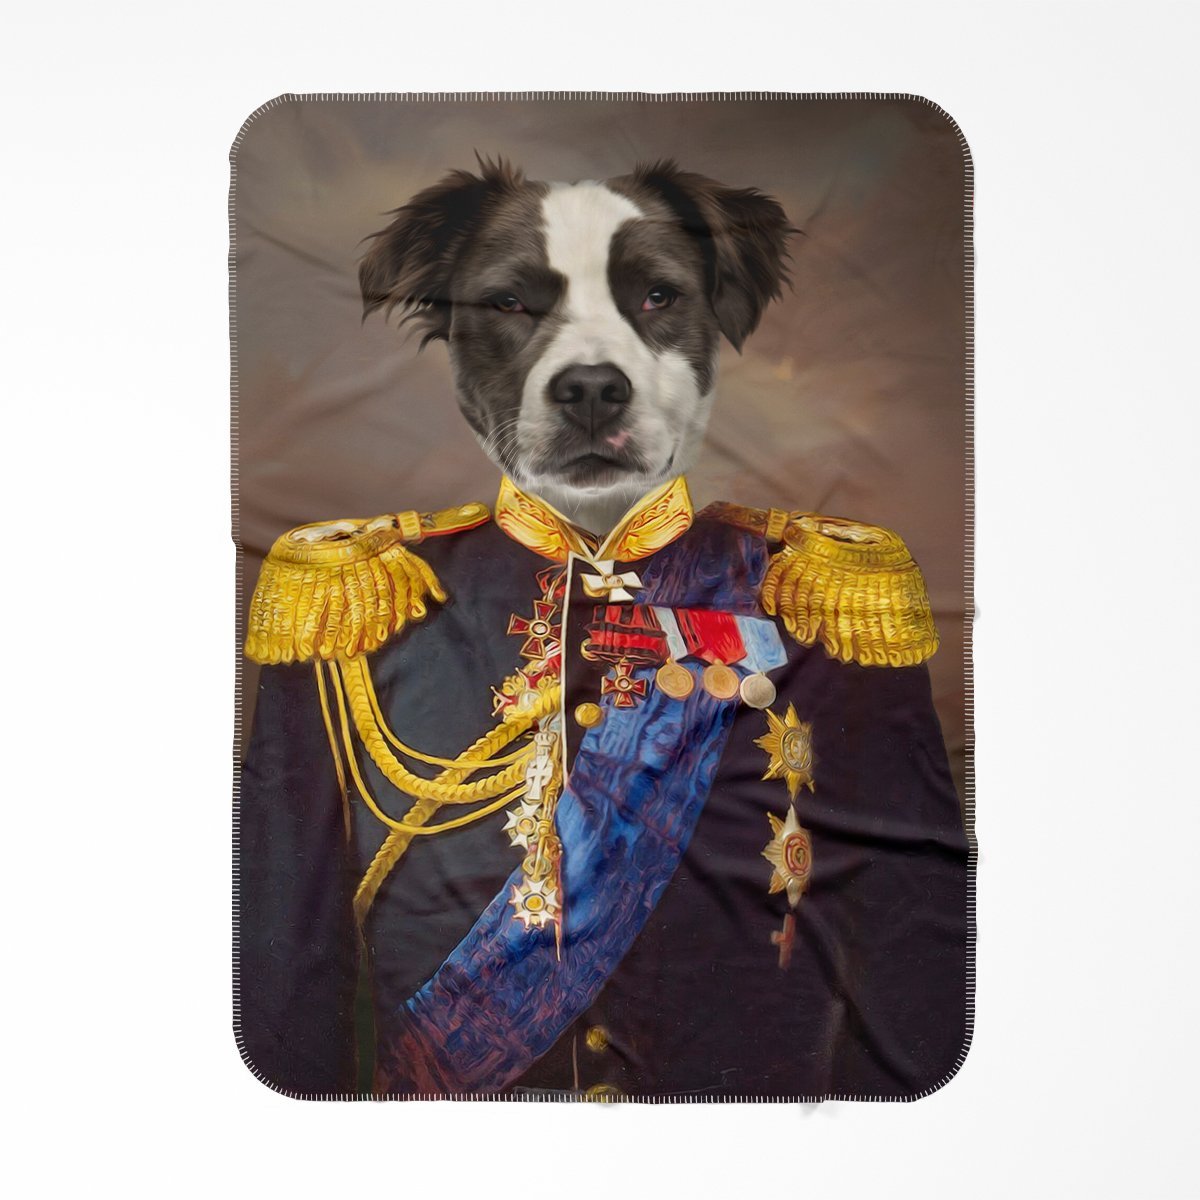 The Seasoned Sargent: Custom Pet Blanket - Paw & Glory - #pet portraits# - #dog portraits# - #pet portraits uk#Pawandglory, Pet art blanket,custom puppy blankets, blanket with your dog on it, custom dog face blanket, blanket of dog, dog personalized blanket